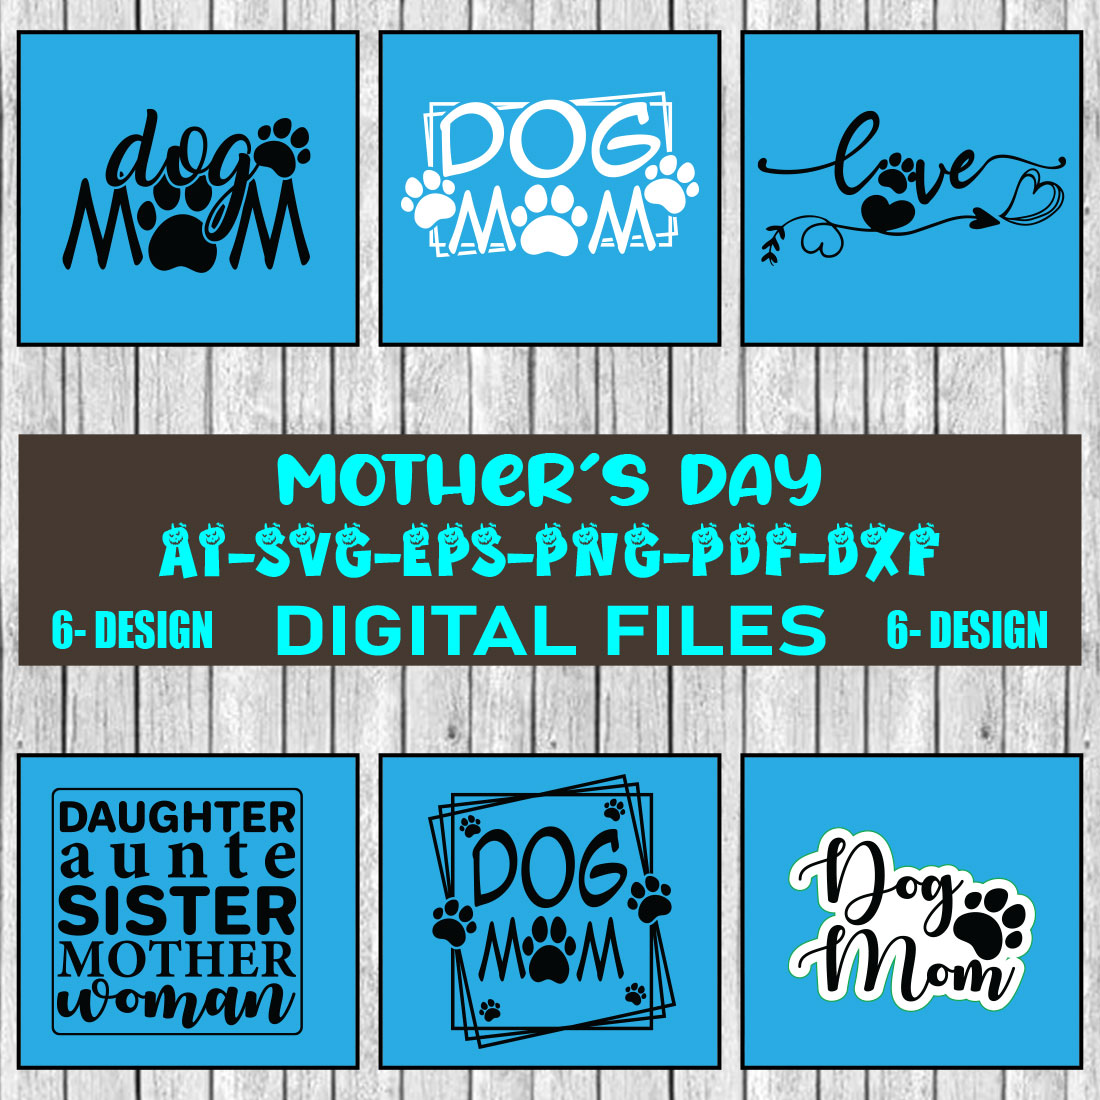 Mother's Day SVG Files Vol-08 cover image.